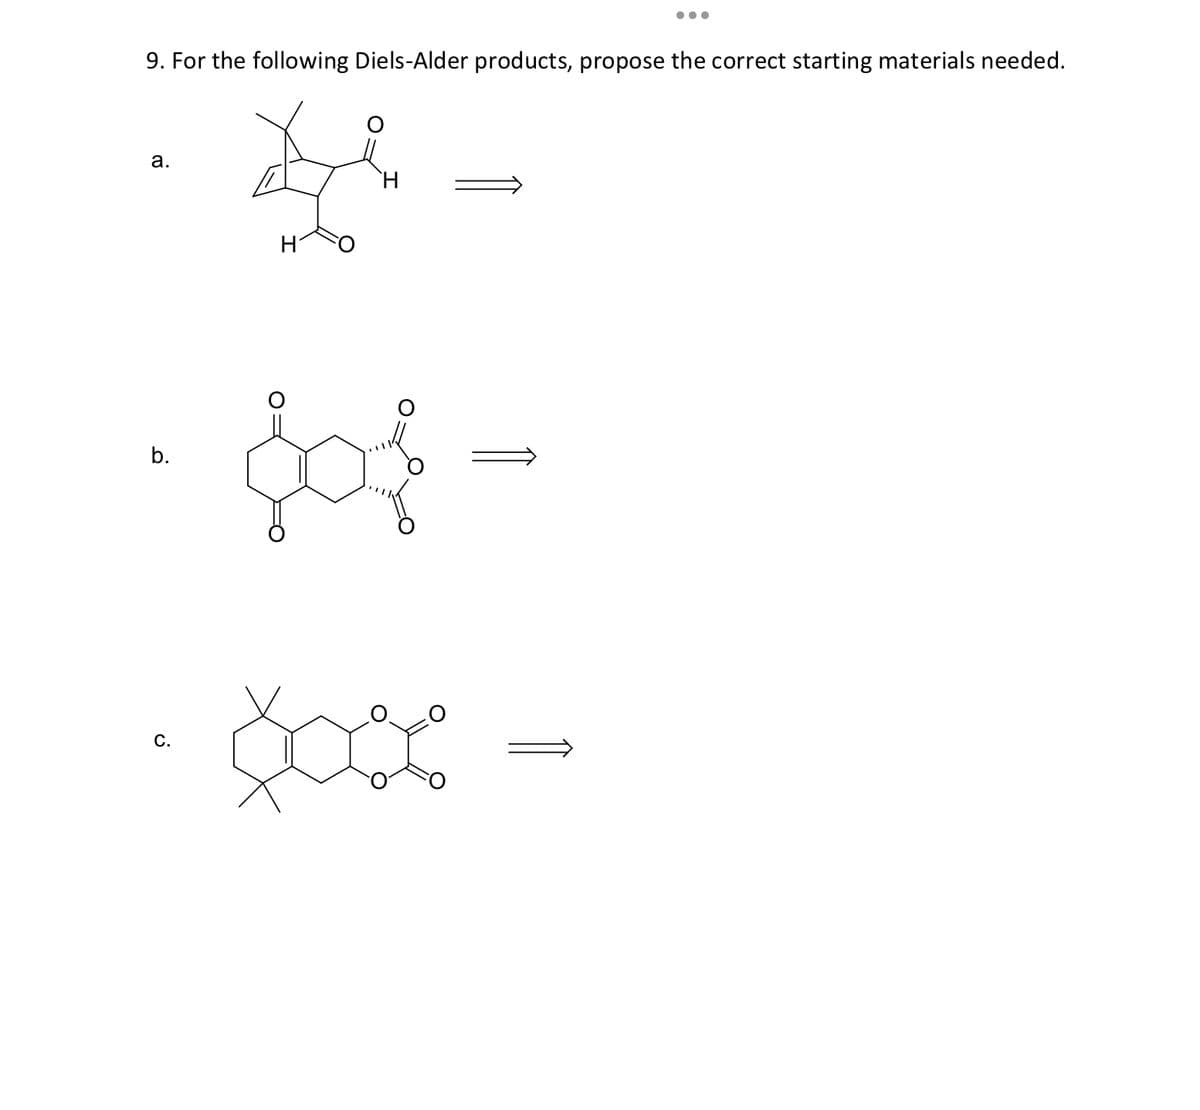 9. For the following Diels-Alder products, propose the correct starting materials needed.
D.
a.
b.
C.
fo{-
●●●
Xox -